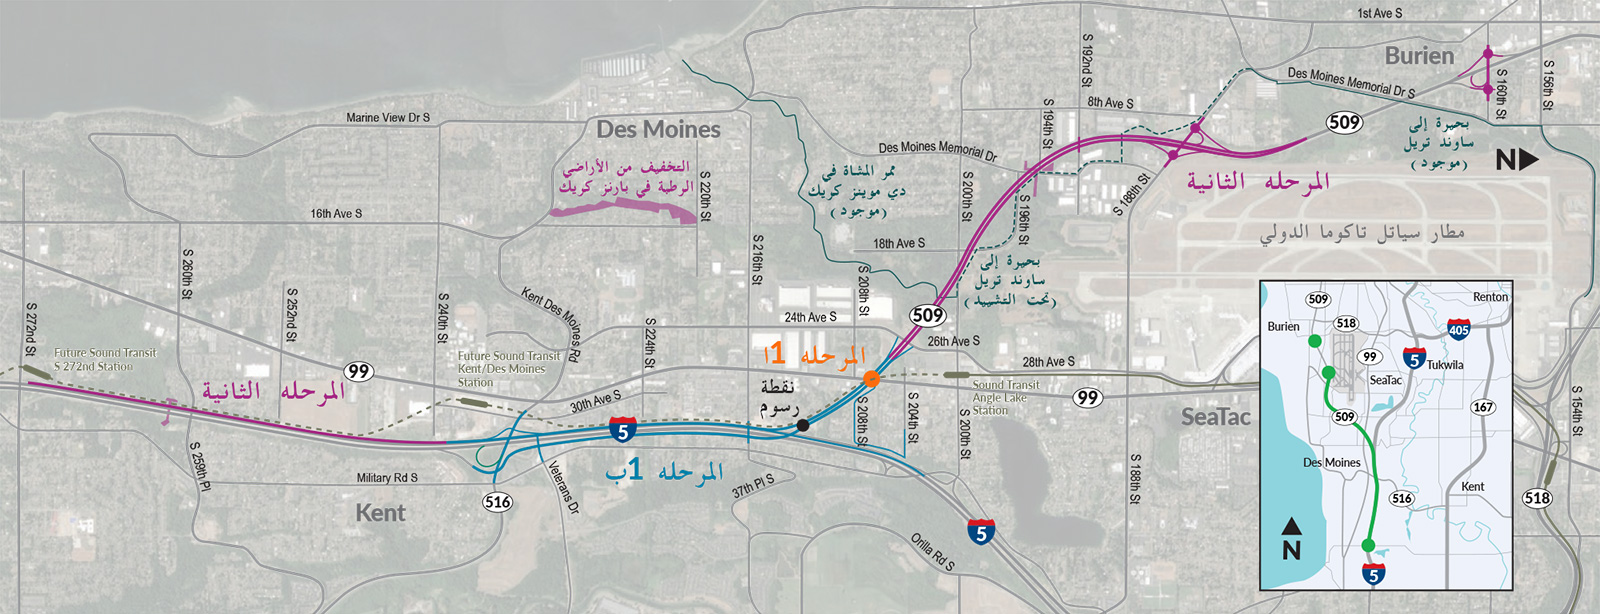 Map of SR 509 Completion Project broken out by project stage, all labels in Arabic.
